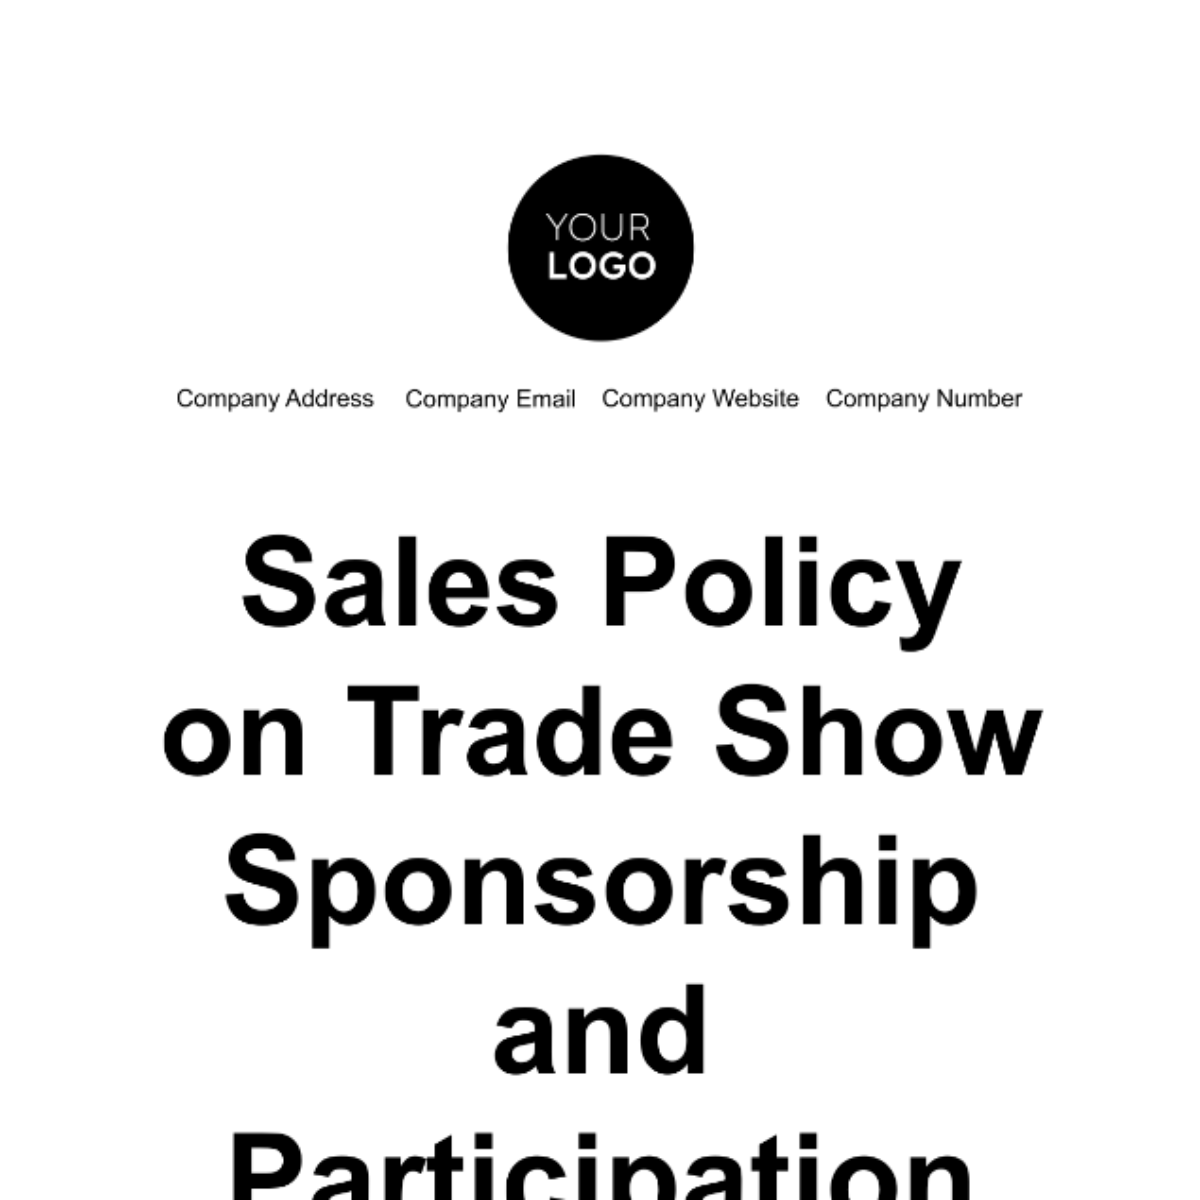 Sales Policy on Trade Show Sponsorship and Participation Template